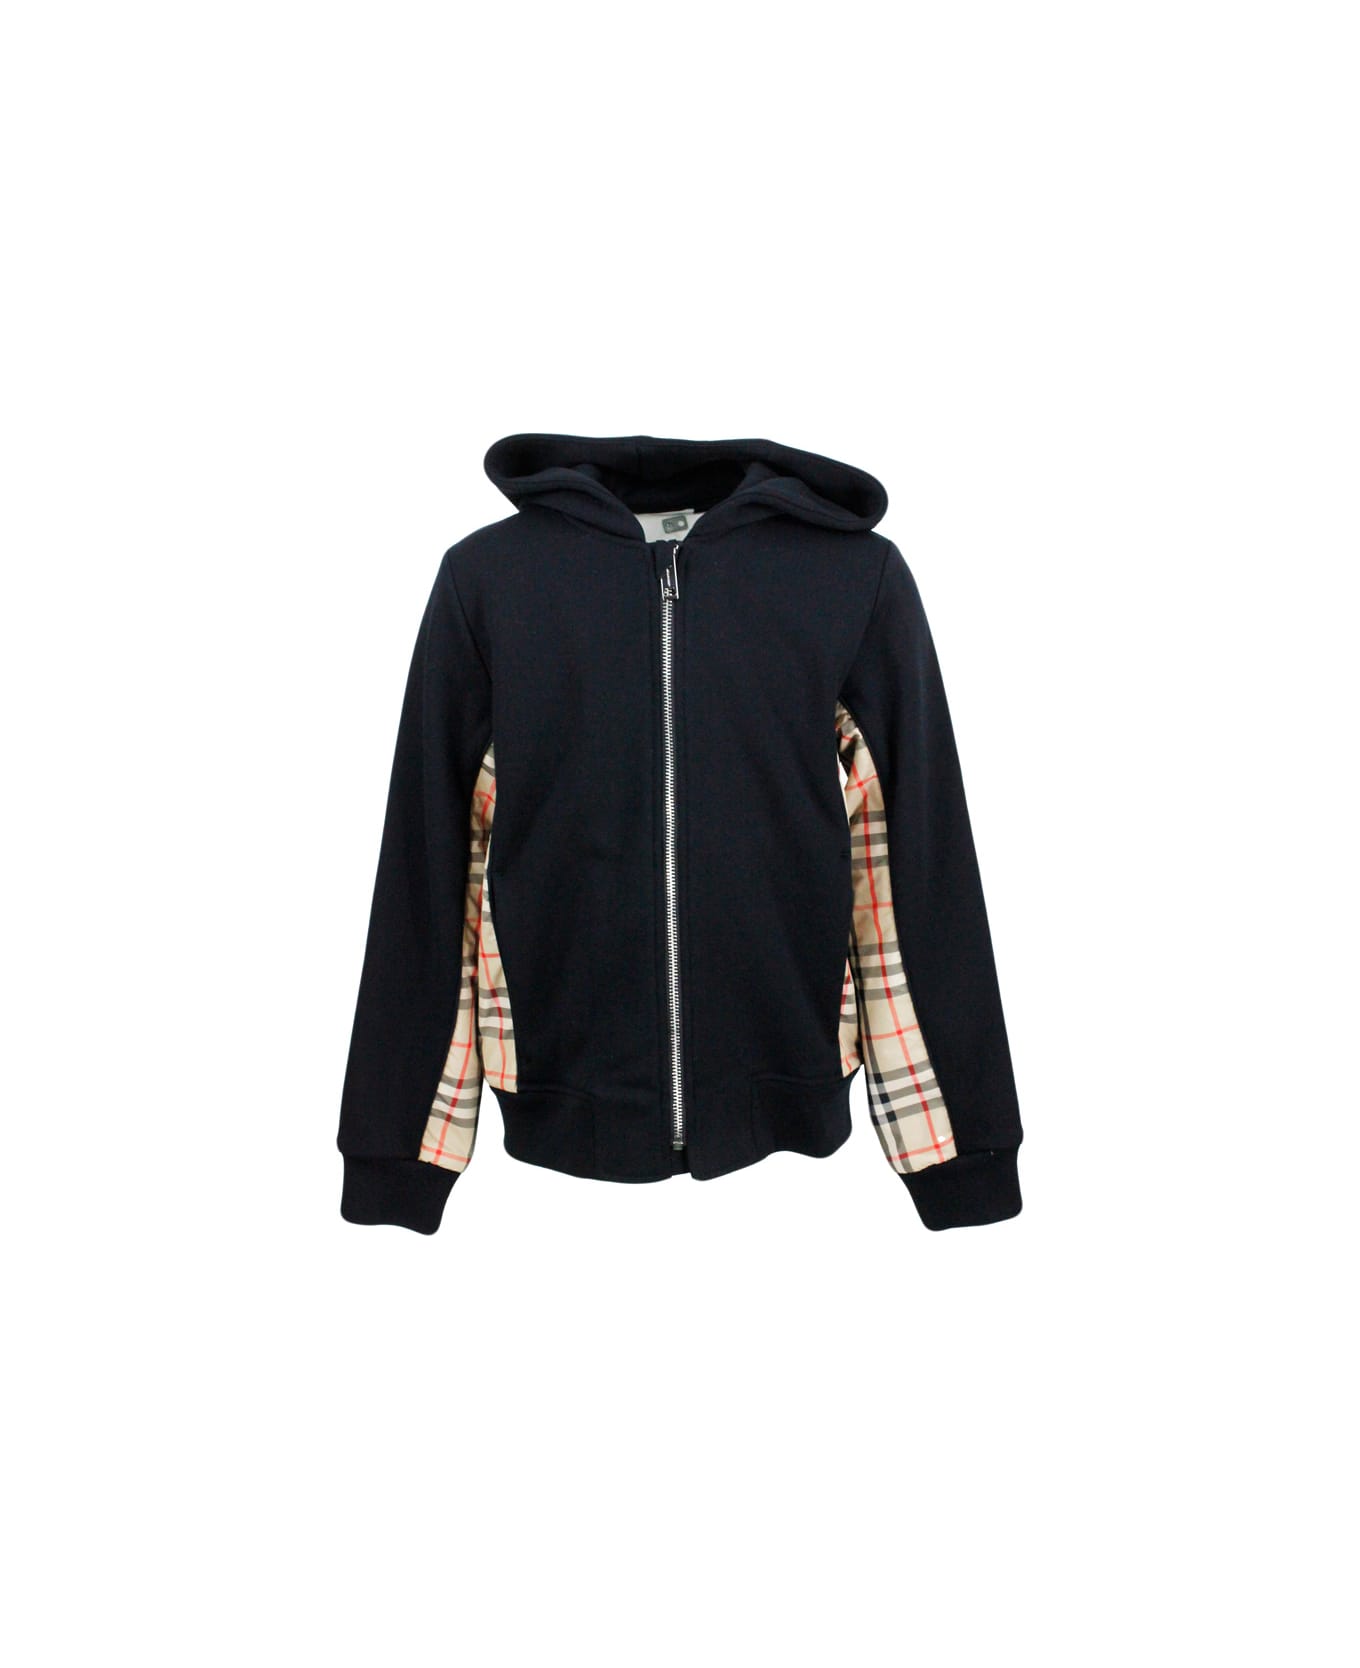 Burberry Cotton Sweatshirt With Hood And Check On The Sides. Zip Closure - Black